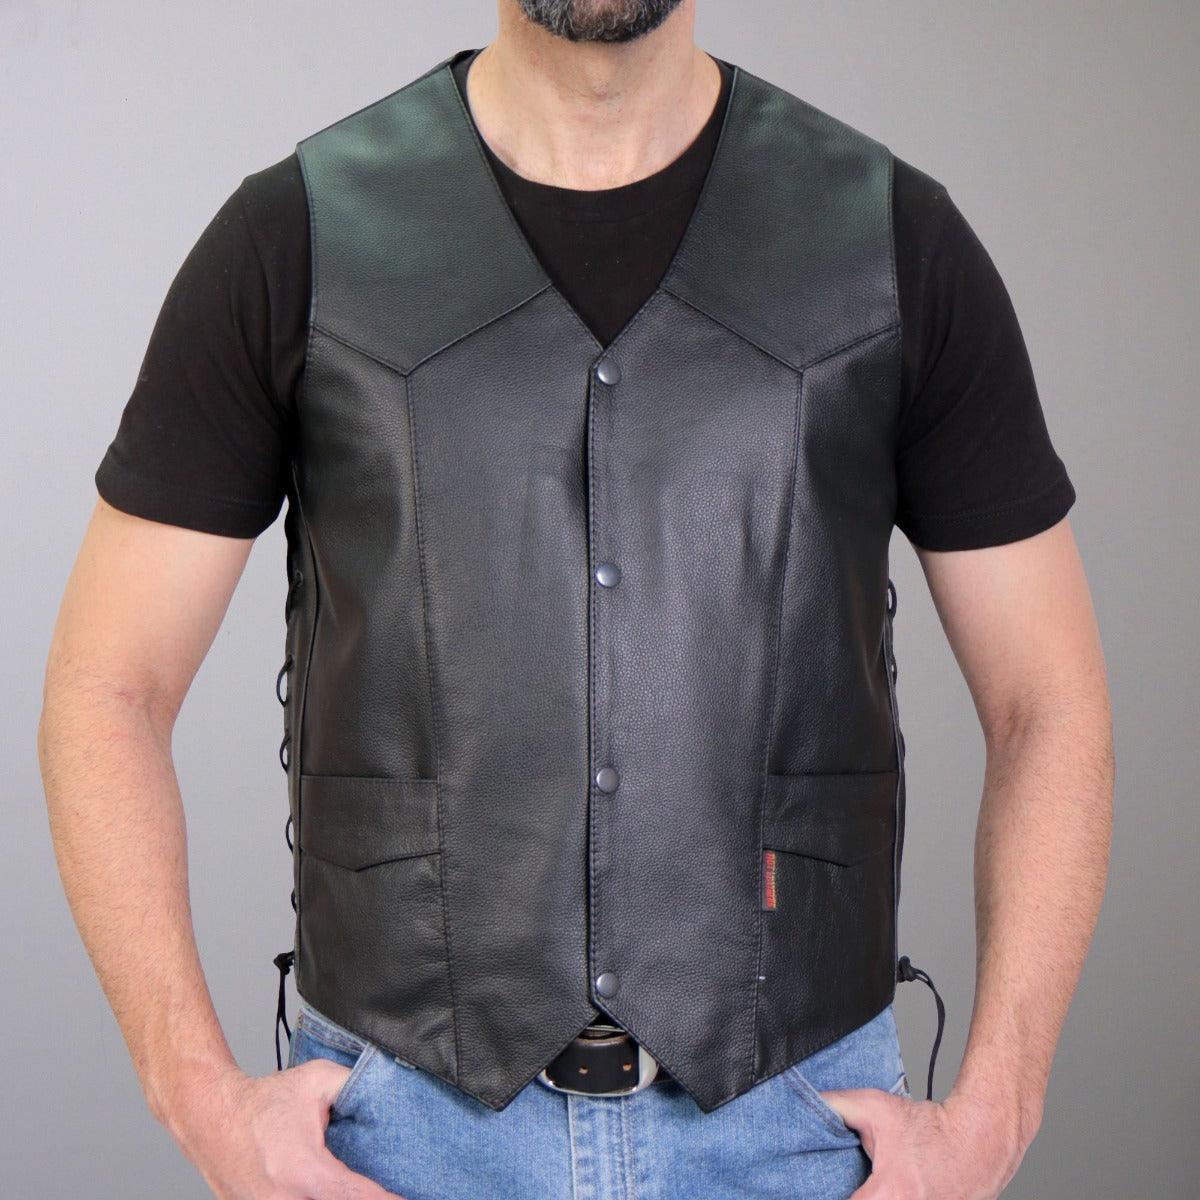 Hot Leathers Men's Cowhide Leather Vest W/ Side Lace - American Legend Rider